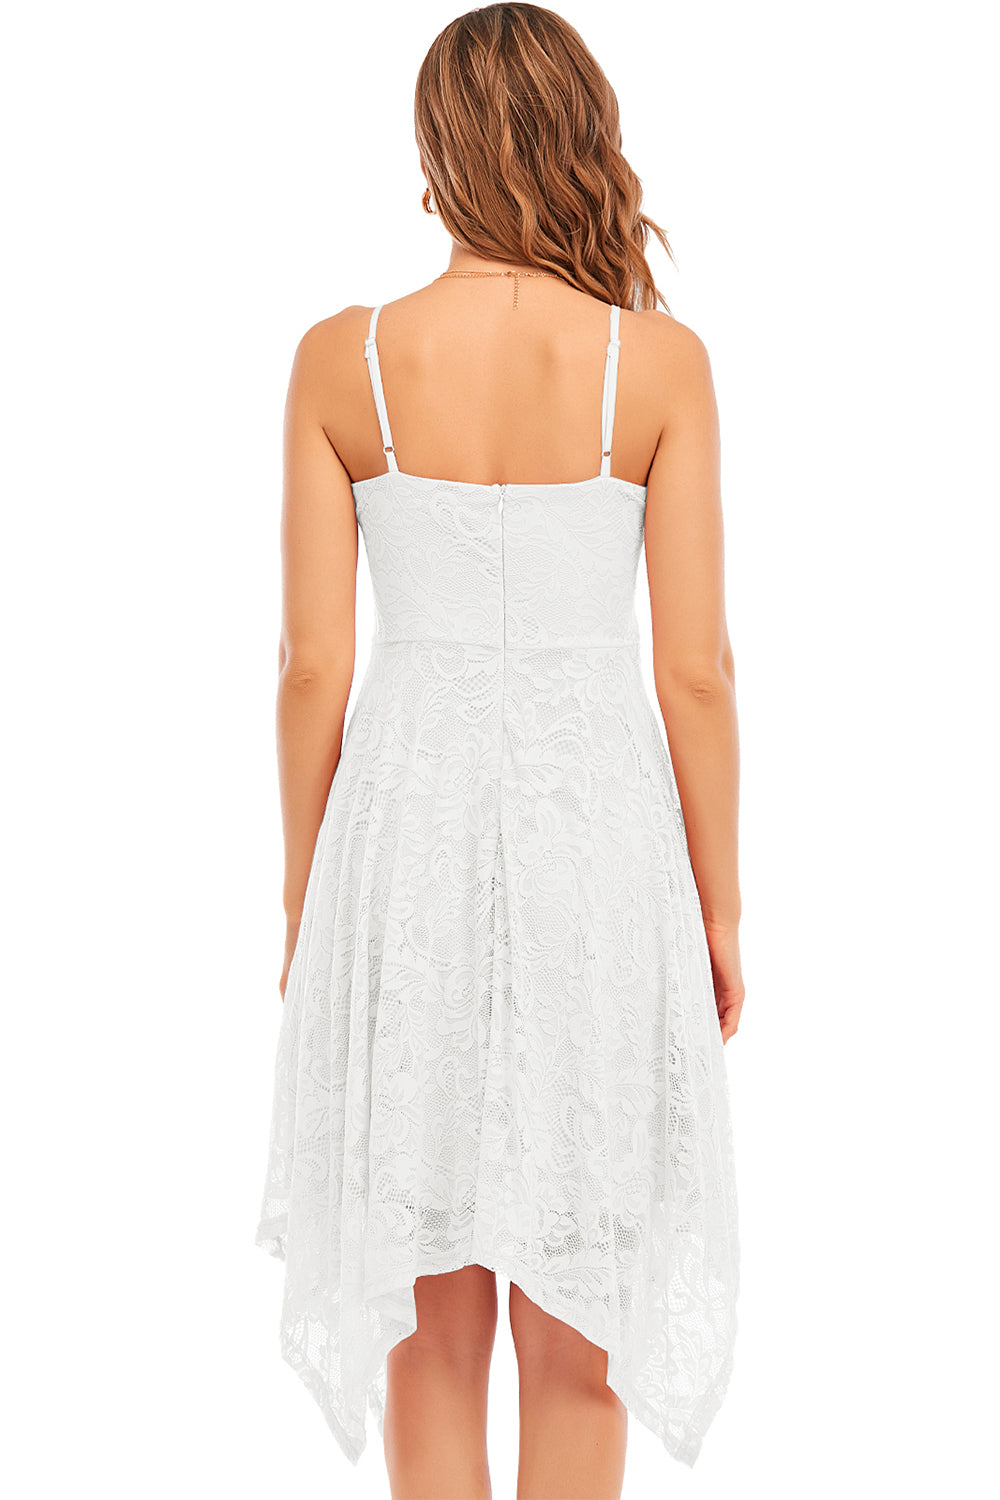 White Spaghetti Straps High Low Lace Party Dres